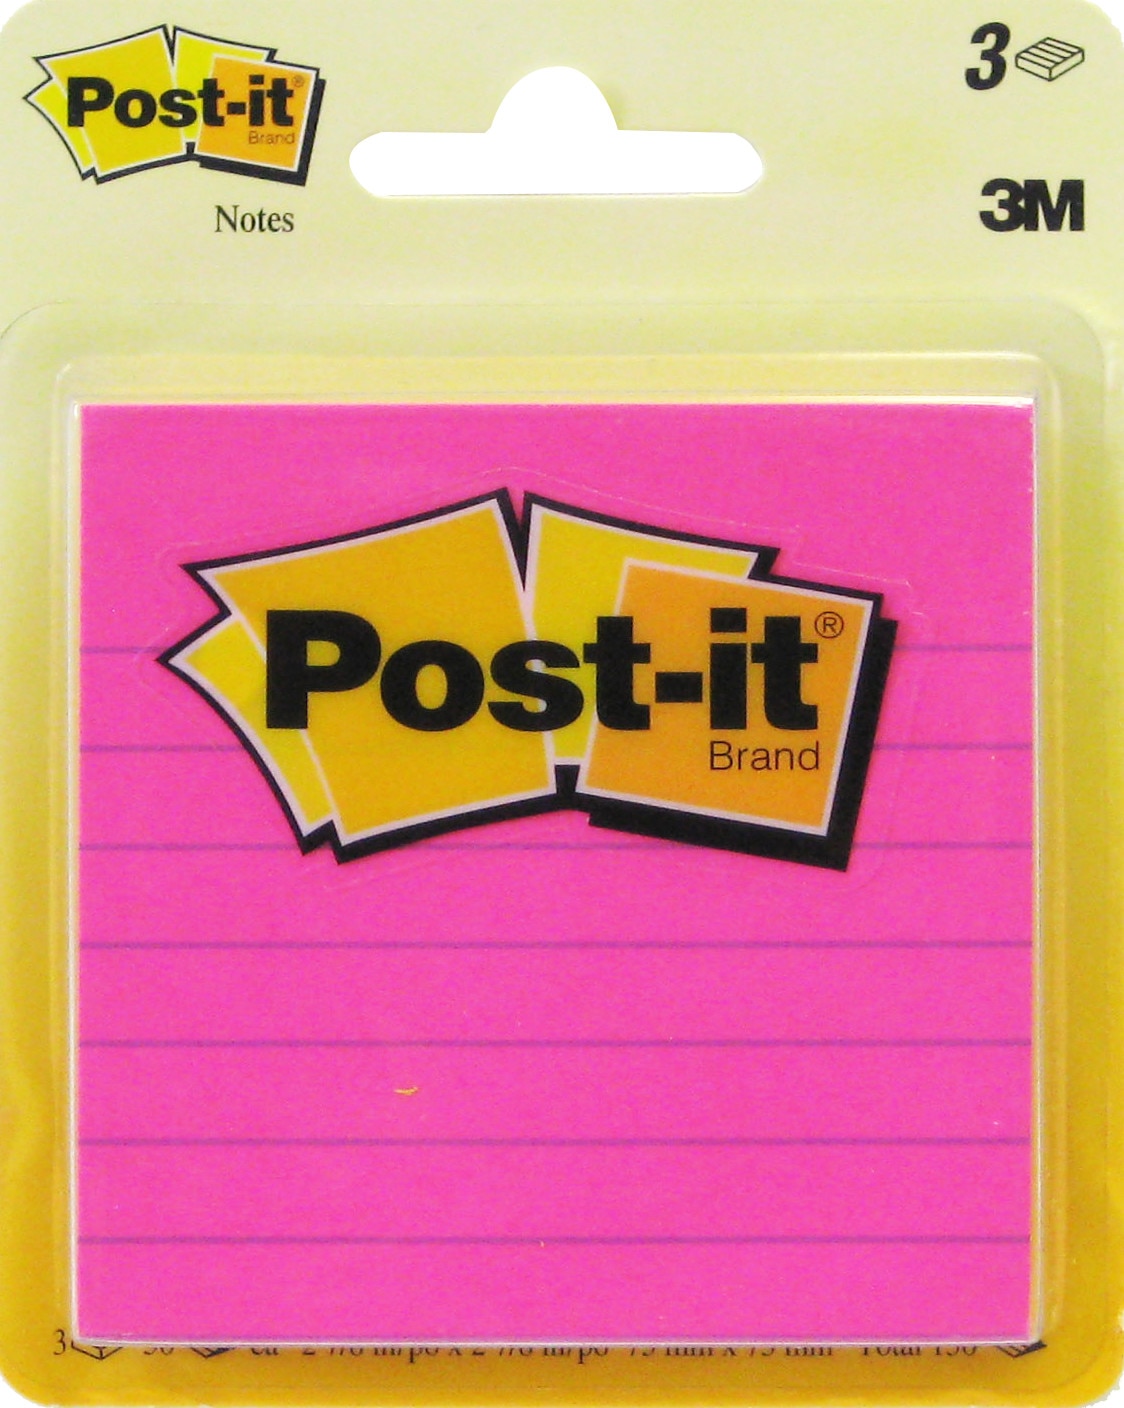 3M Post-it Notes 3x3 Lined Assorted Colors 3pk